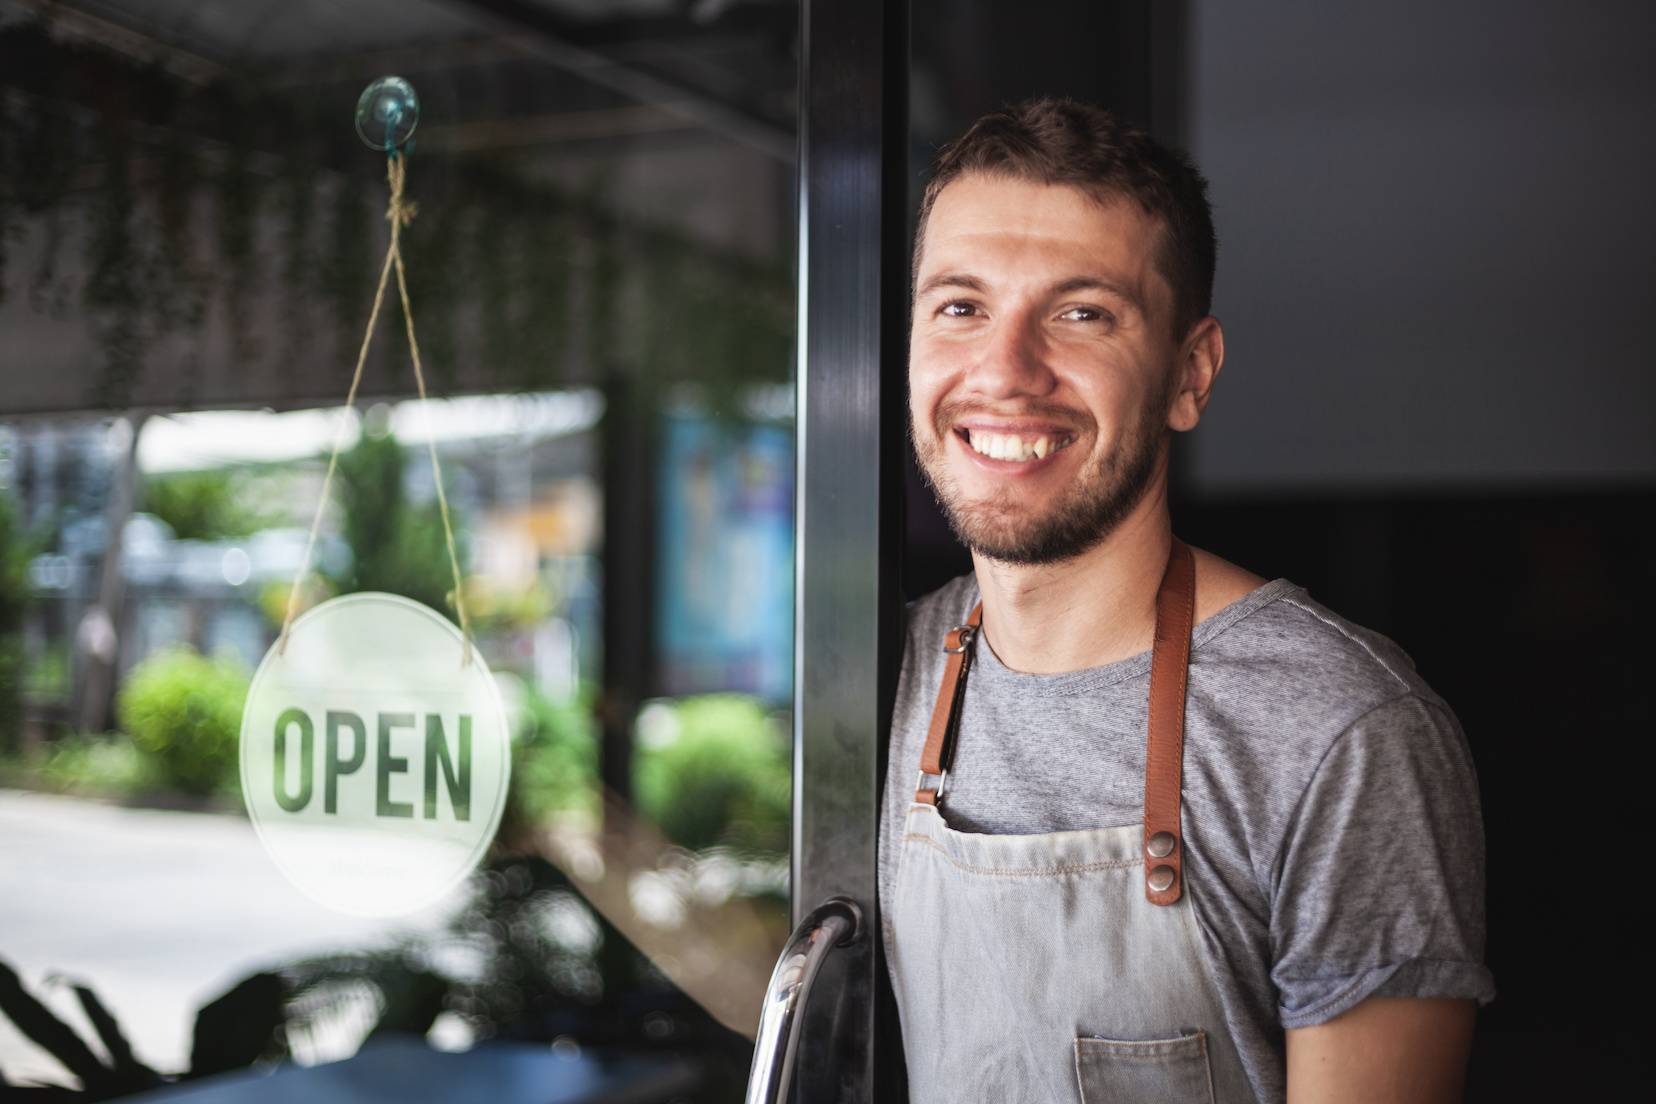 Man holding a cafe door open with a sign on it that reads "Open"